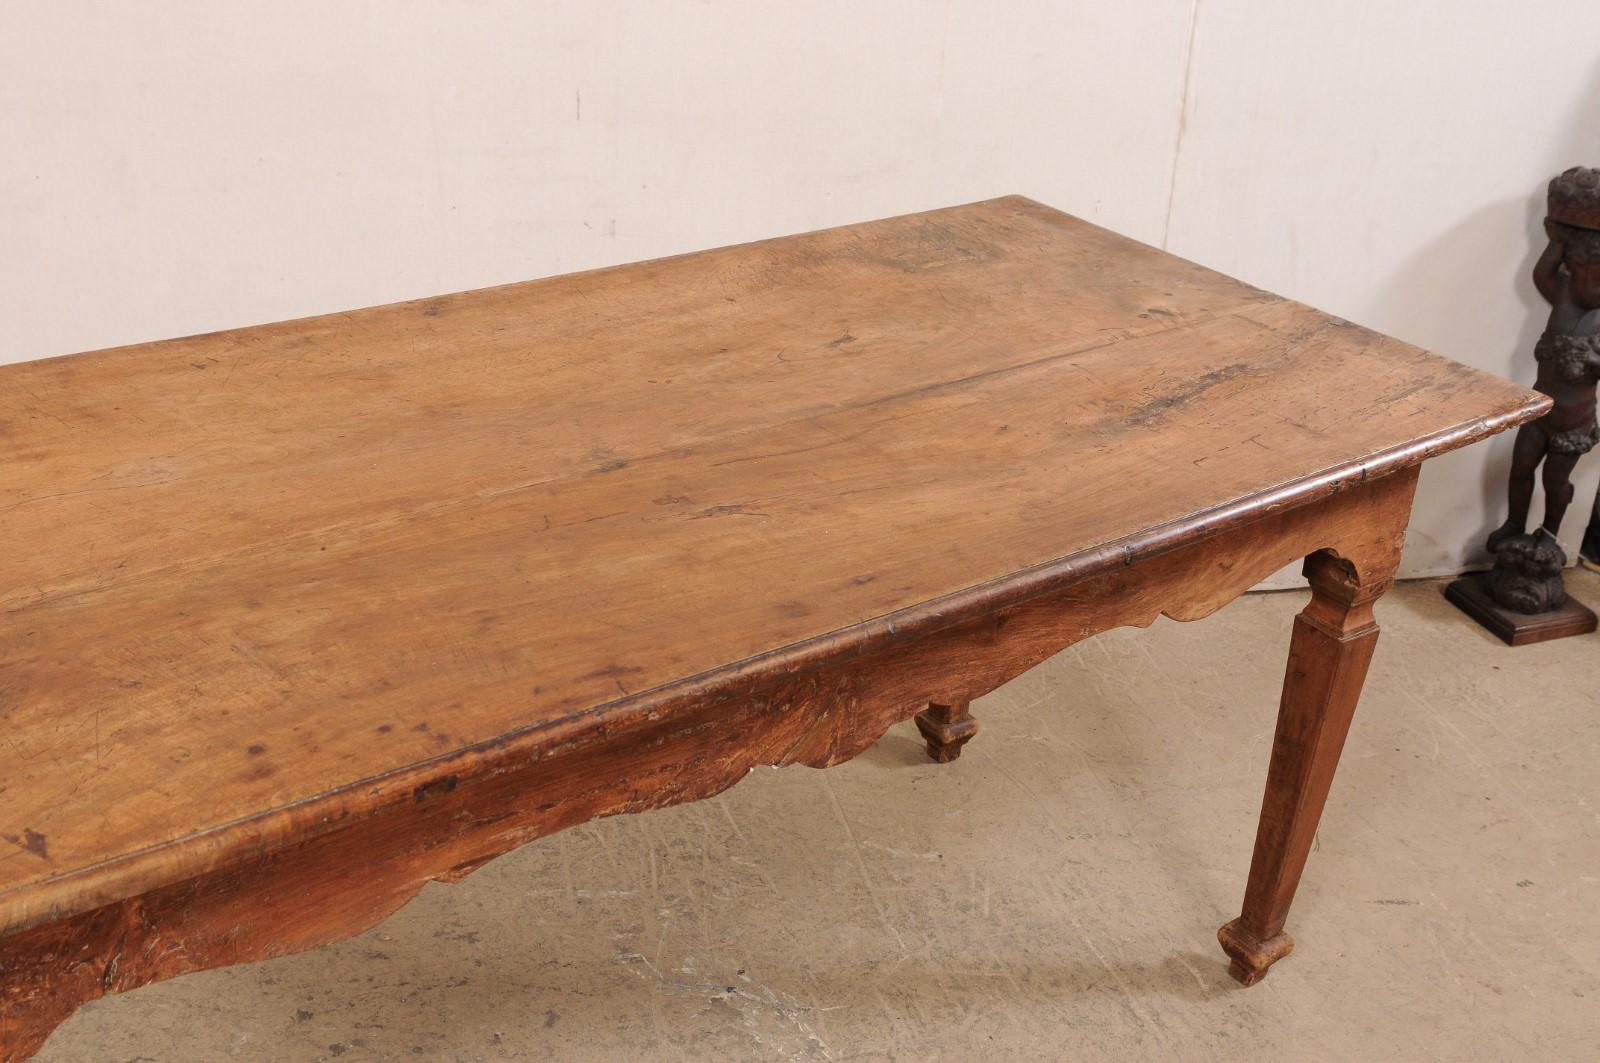 Wood A Late 18th C. Italian Walnut Farm Table with Carved Skirt, 6 Ft Long For Sale